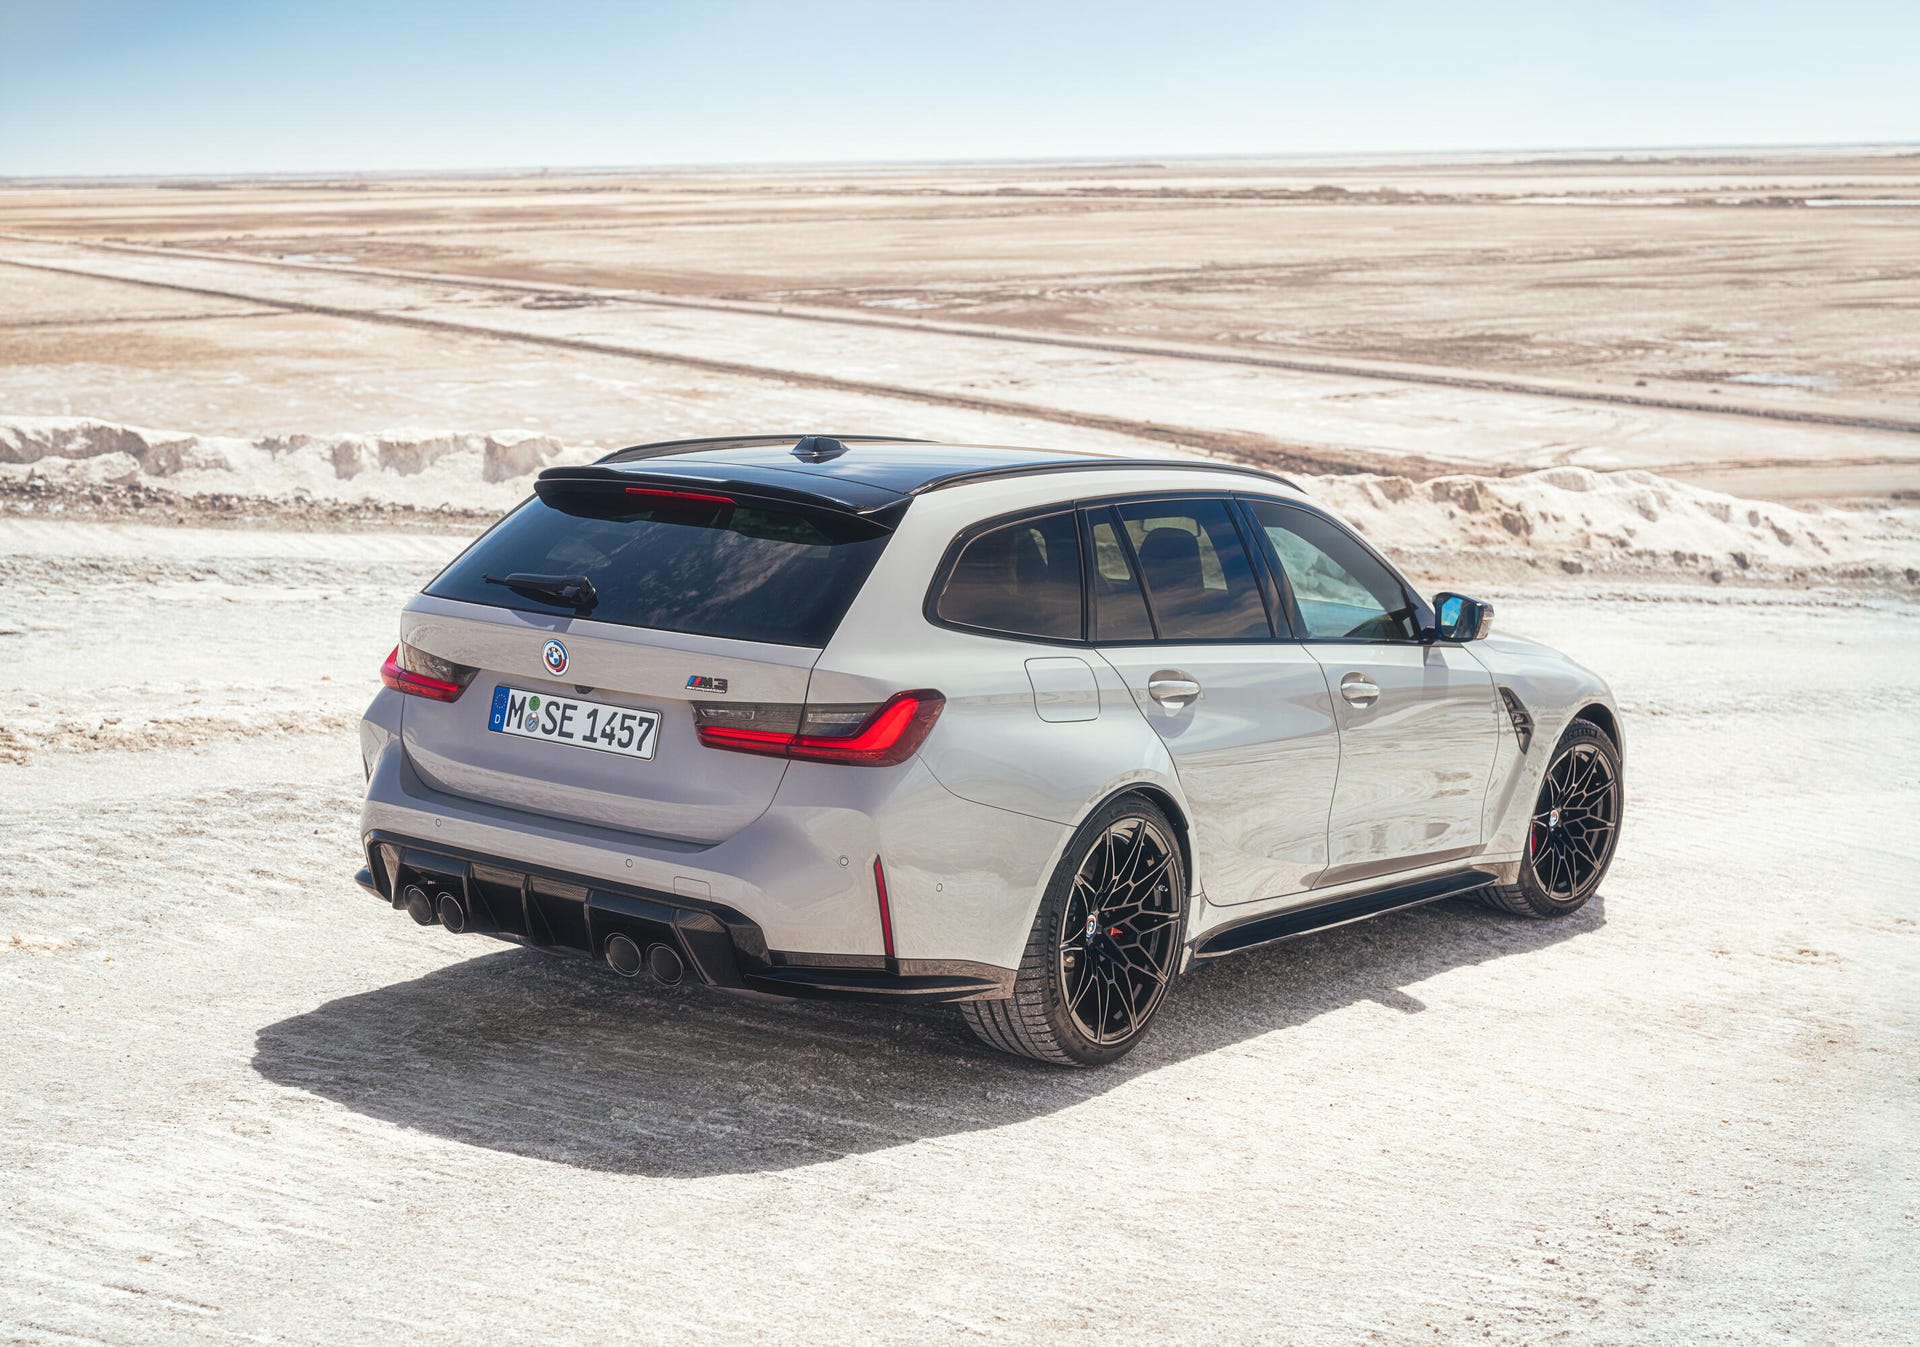 Rear 3/4 view of a gray BMW M3 Touring wagon in the desert